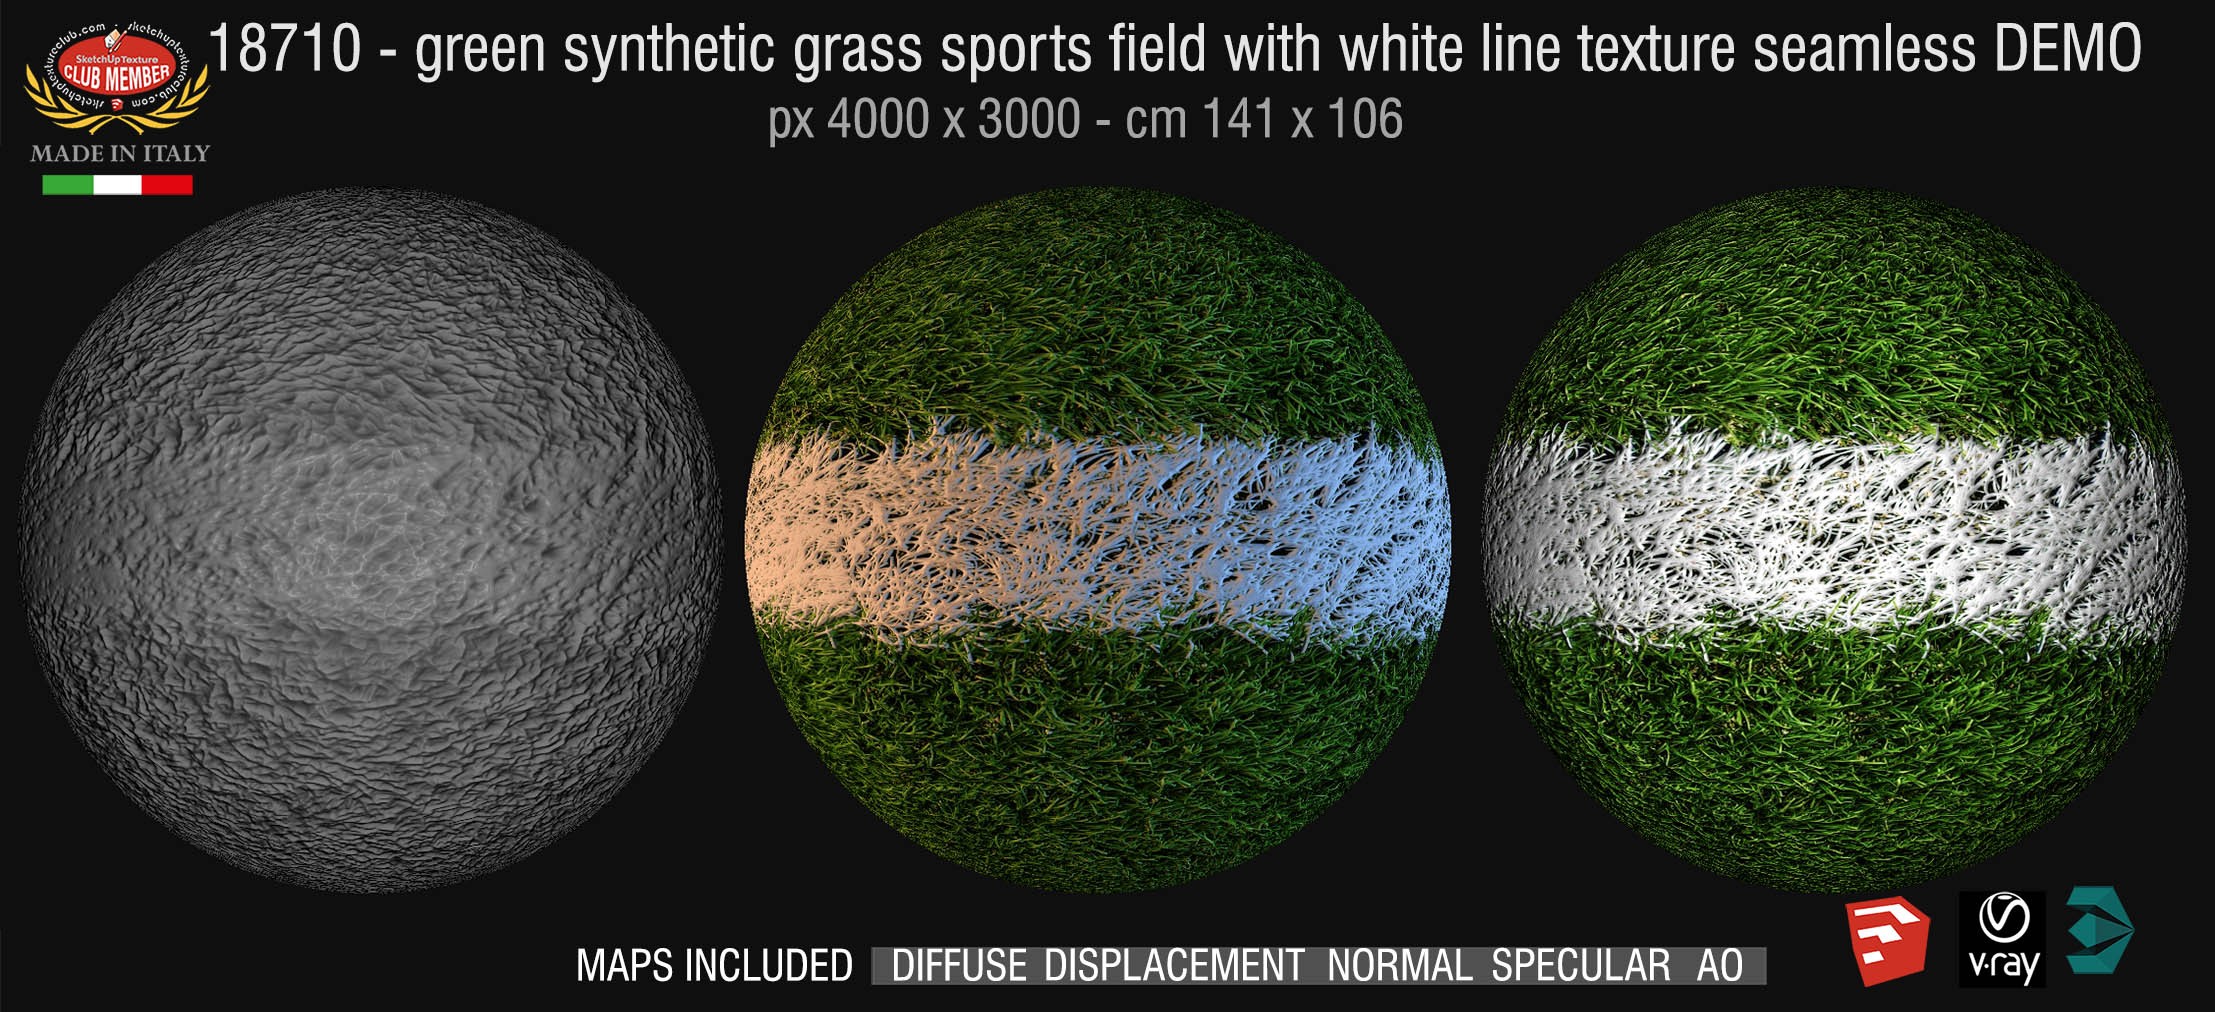 18710 HR Green synthetic grass sports field with white line texture + maps DEMO